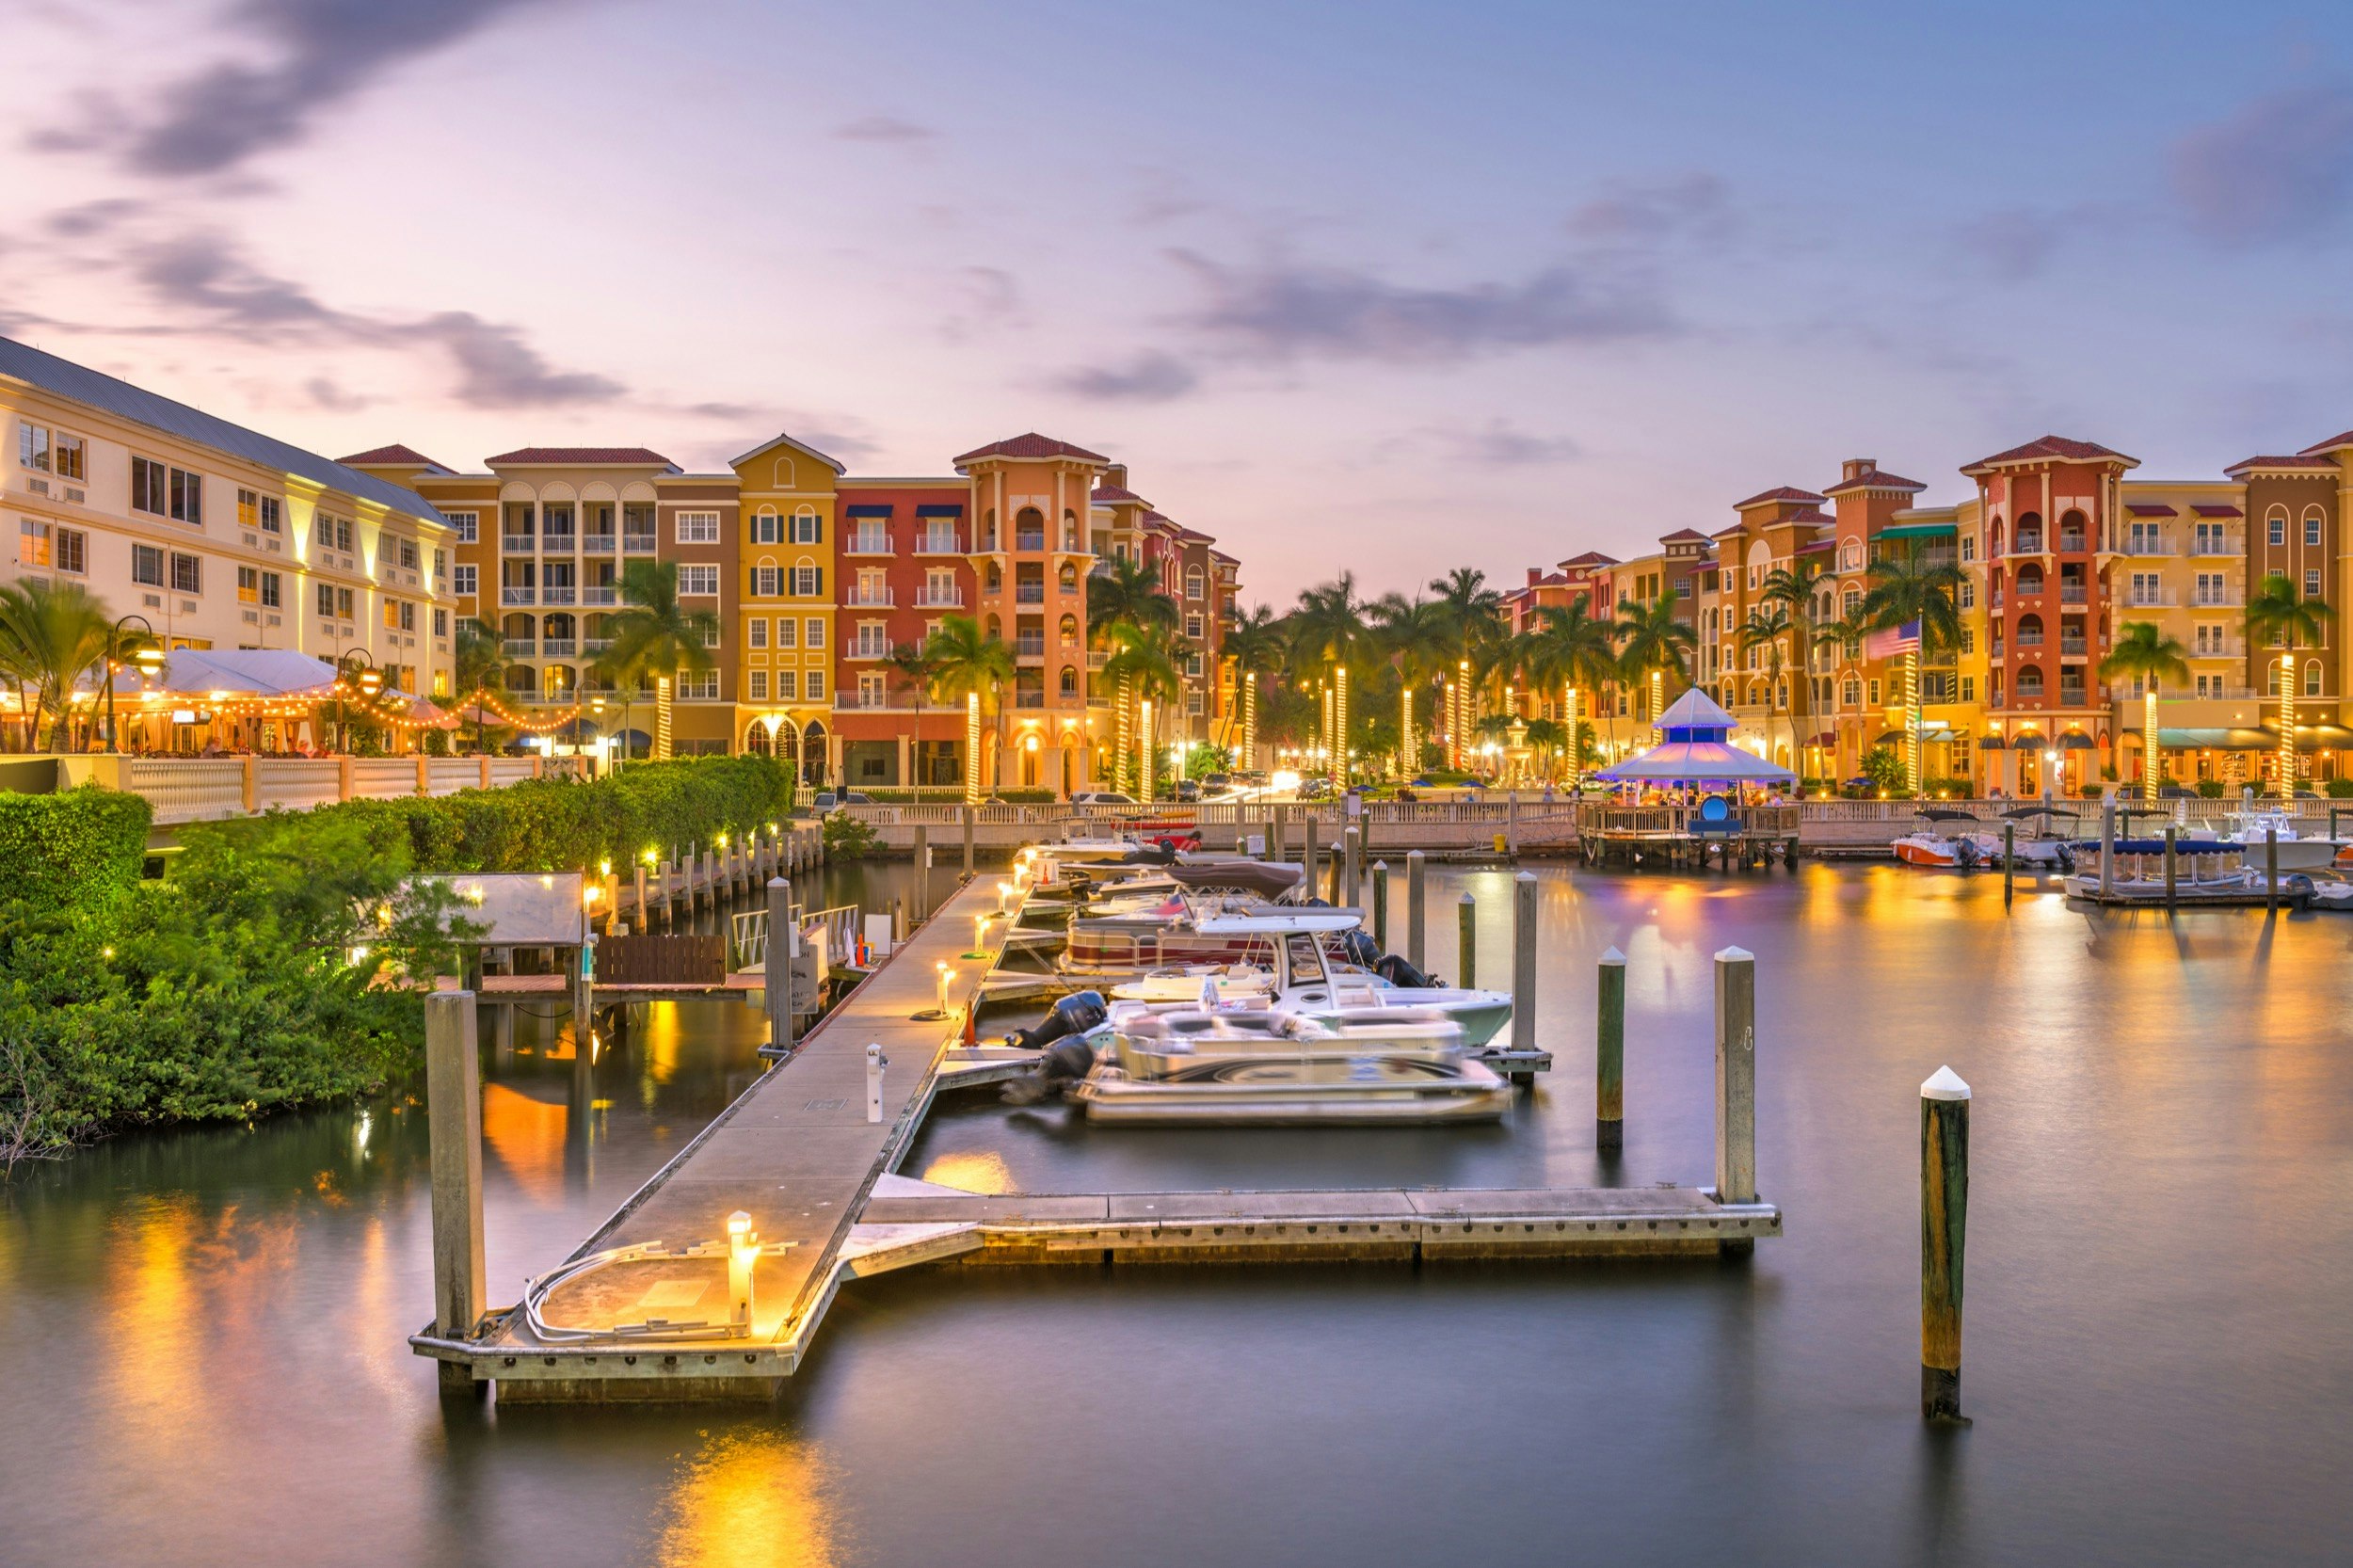 Downtown Naples Florida features sail-up boat docks and a quaint historic downtown